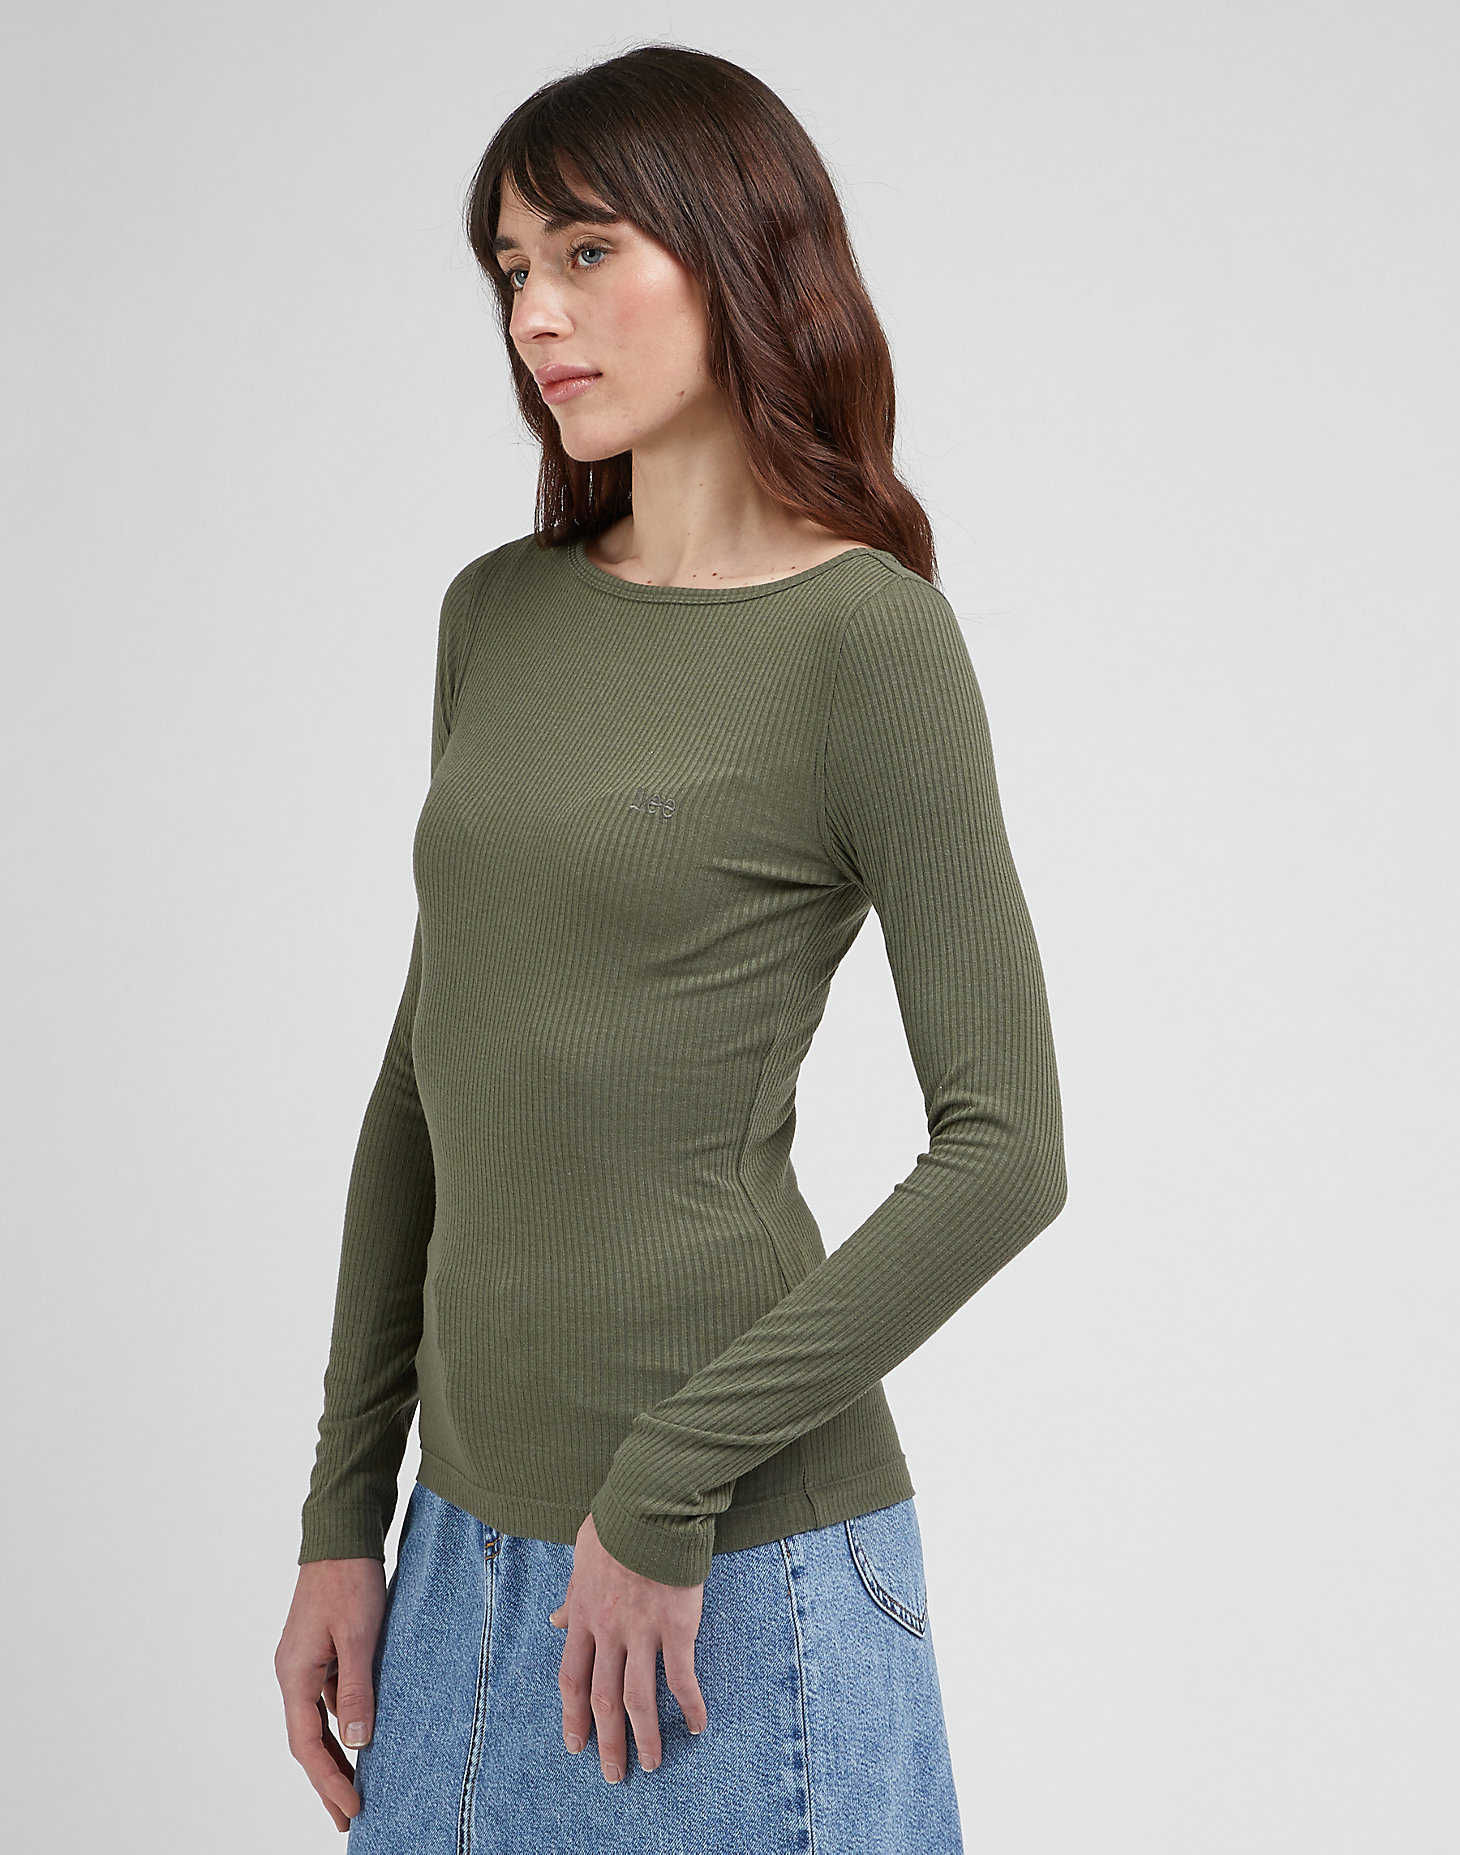 Long Sleeve Boat Neck Tee in Olive Grove alternative view 3